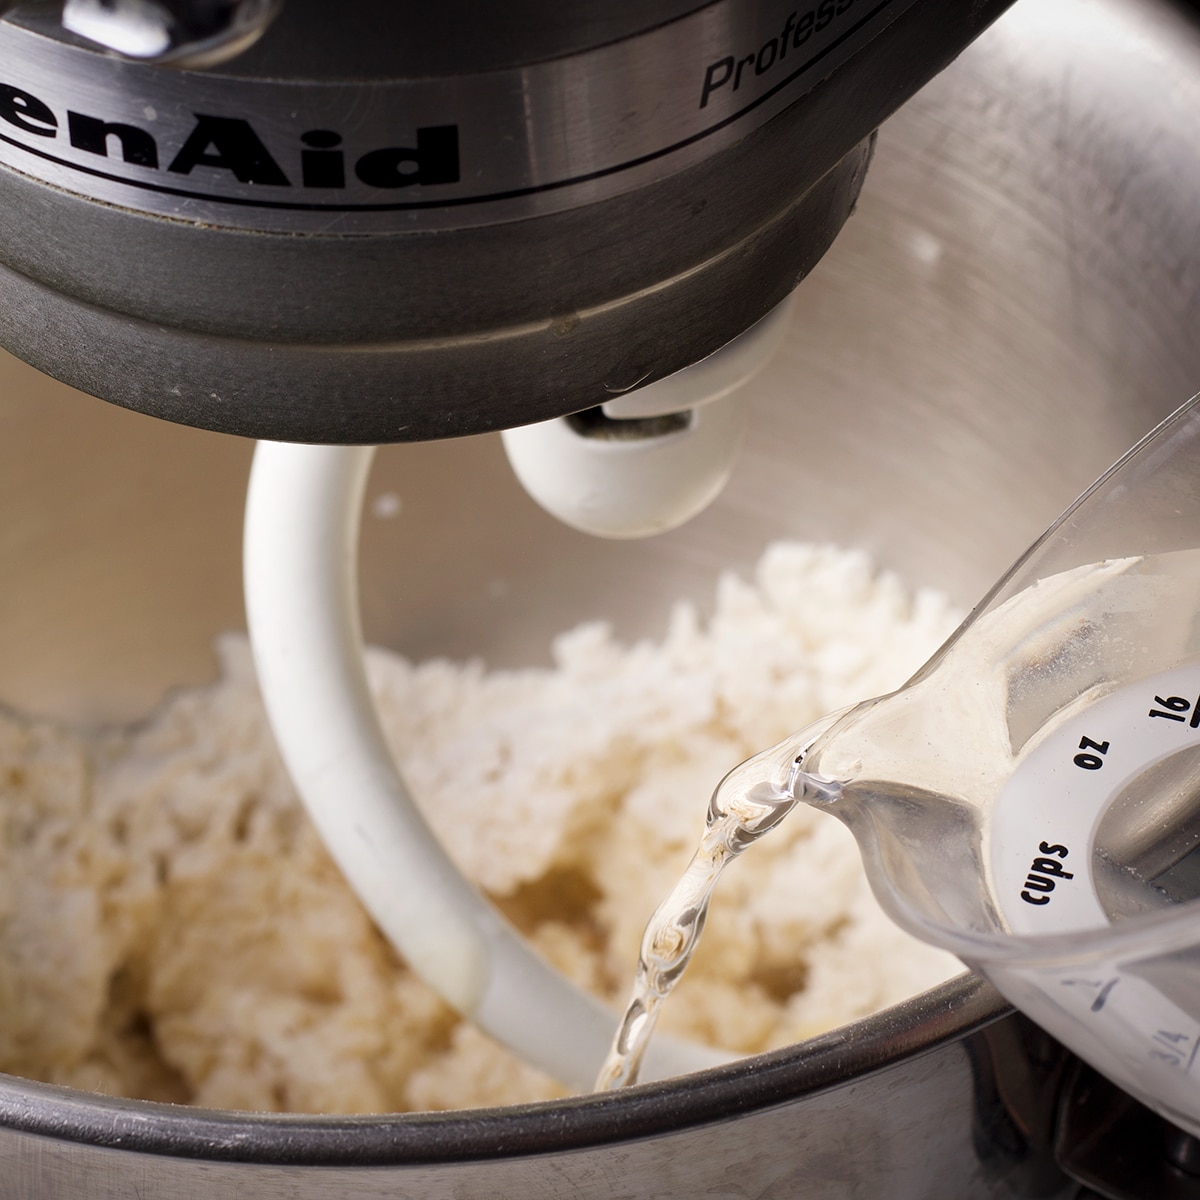 Pouring warm water into the bowl of a stand mixer while the mixer is running to make tortilla dough.